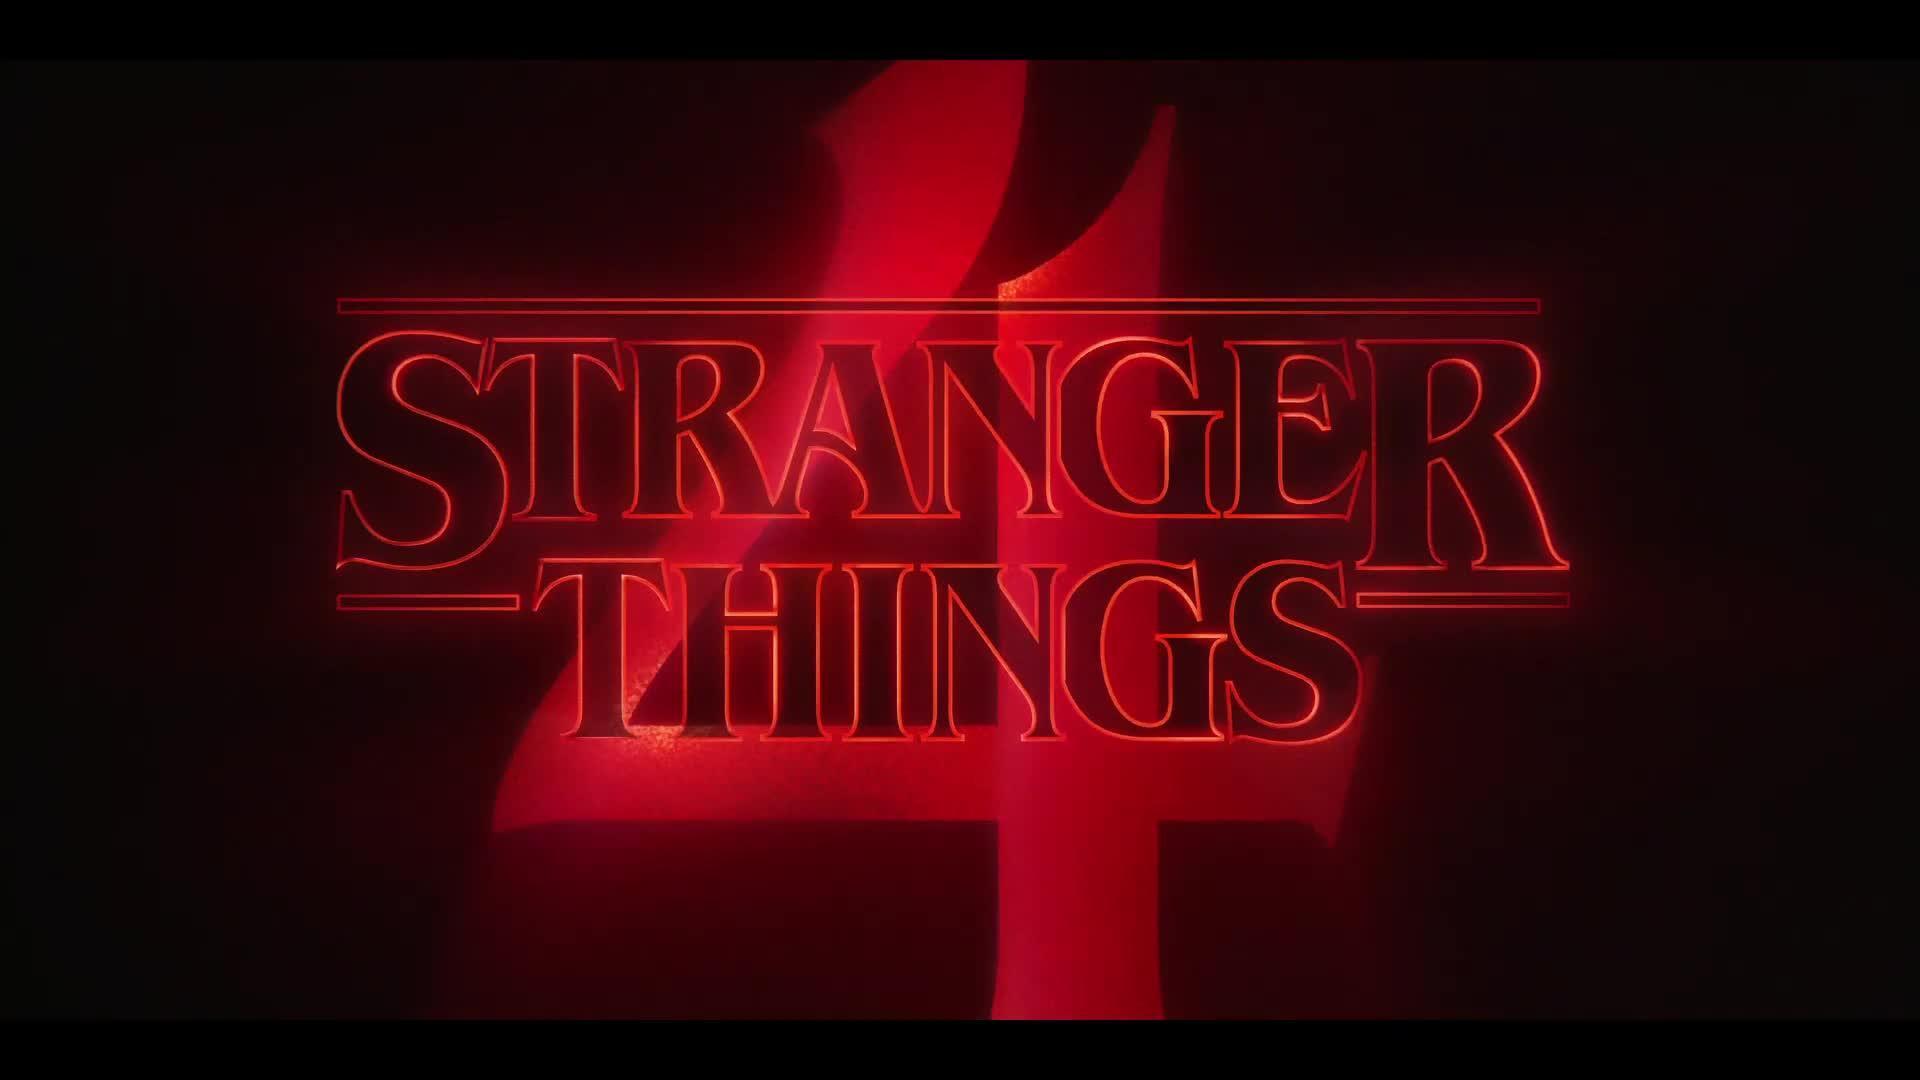 On November 6, 1983, Will Byers disappeared. Stranger Things is now  streaming on Netflix., By Stranger Things